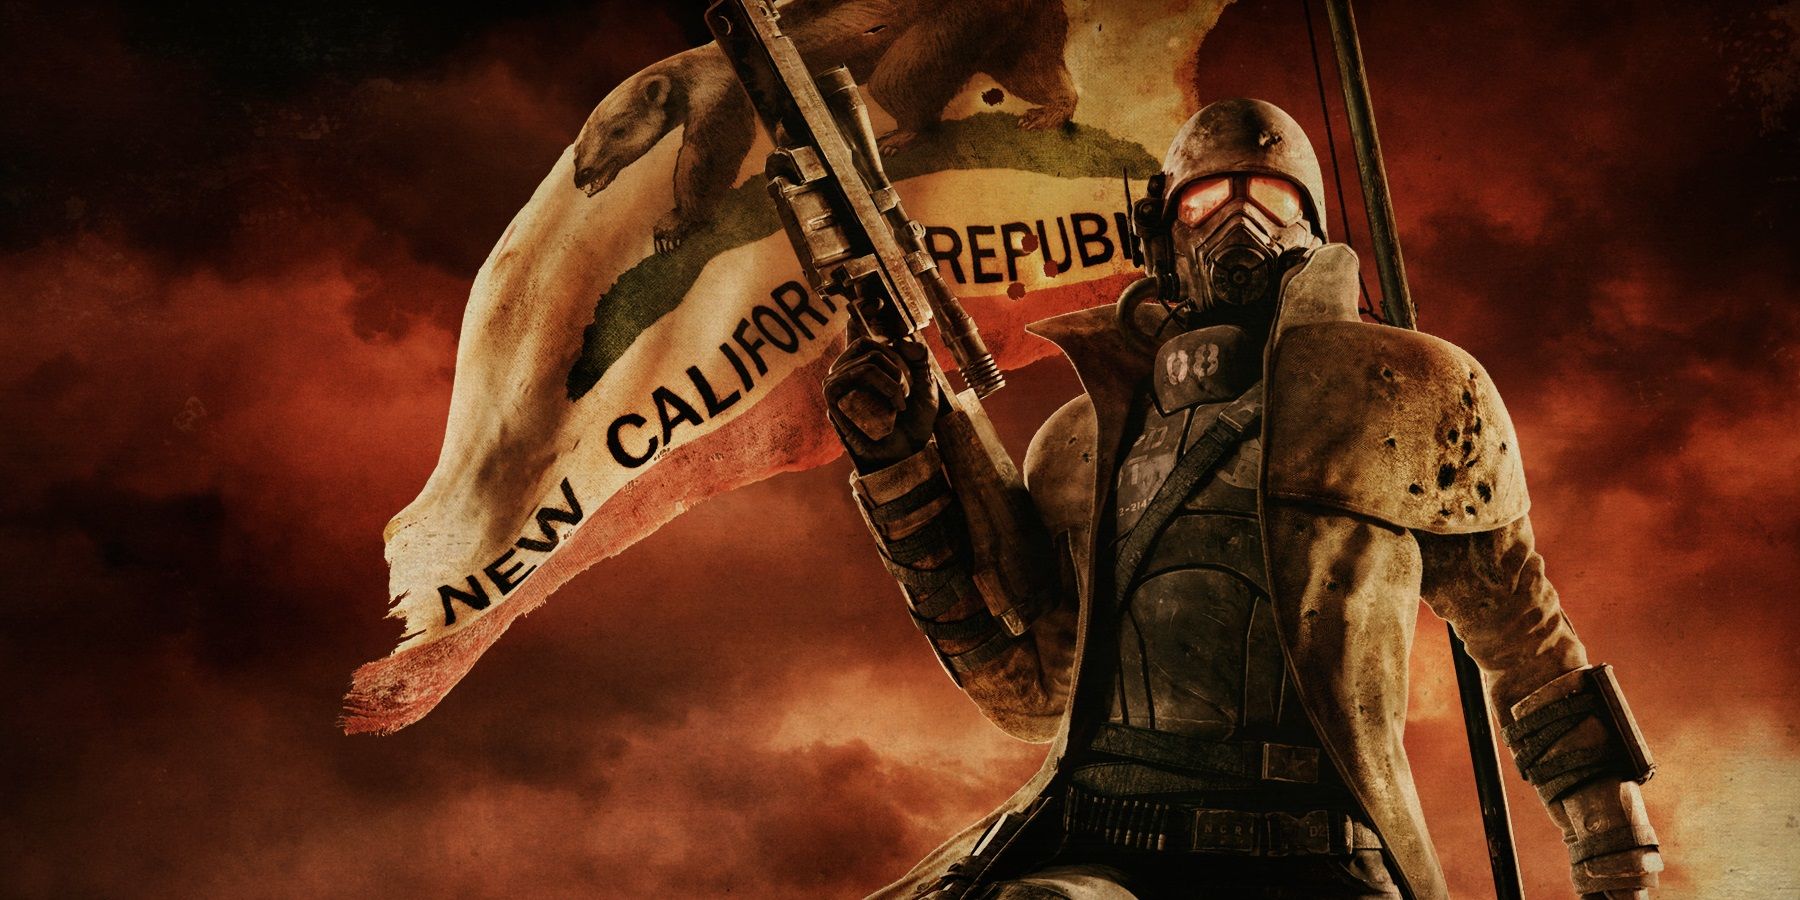 A Fallout soldier standing in front of a New California Republic (NCR) flag